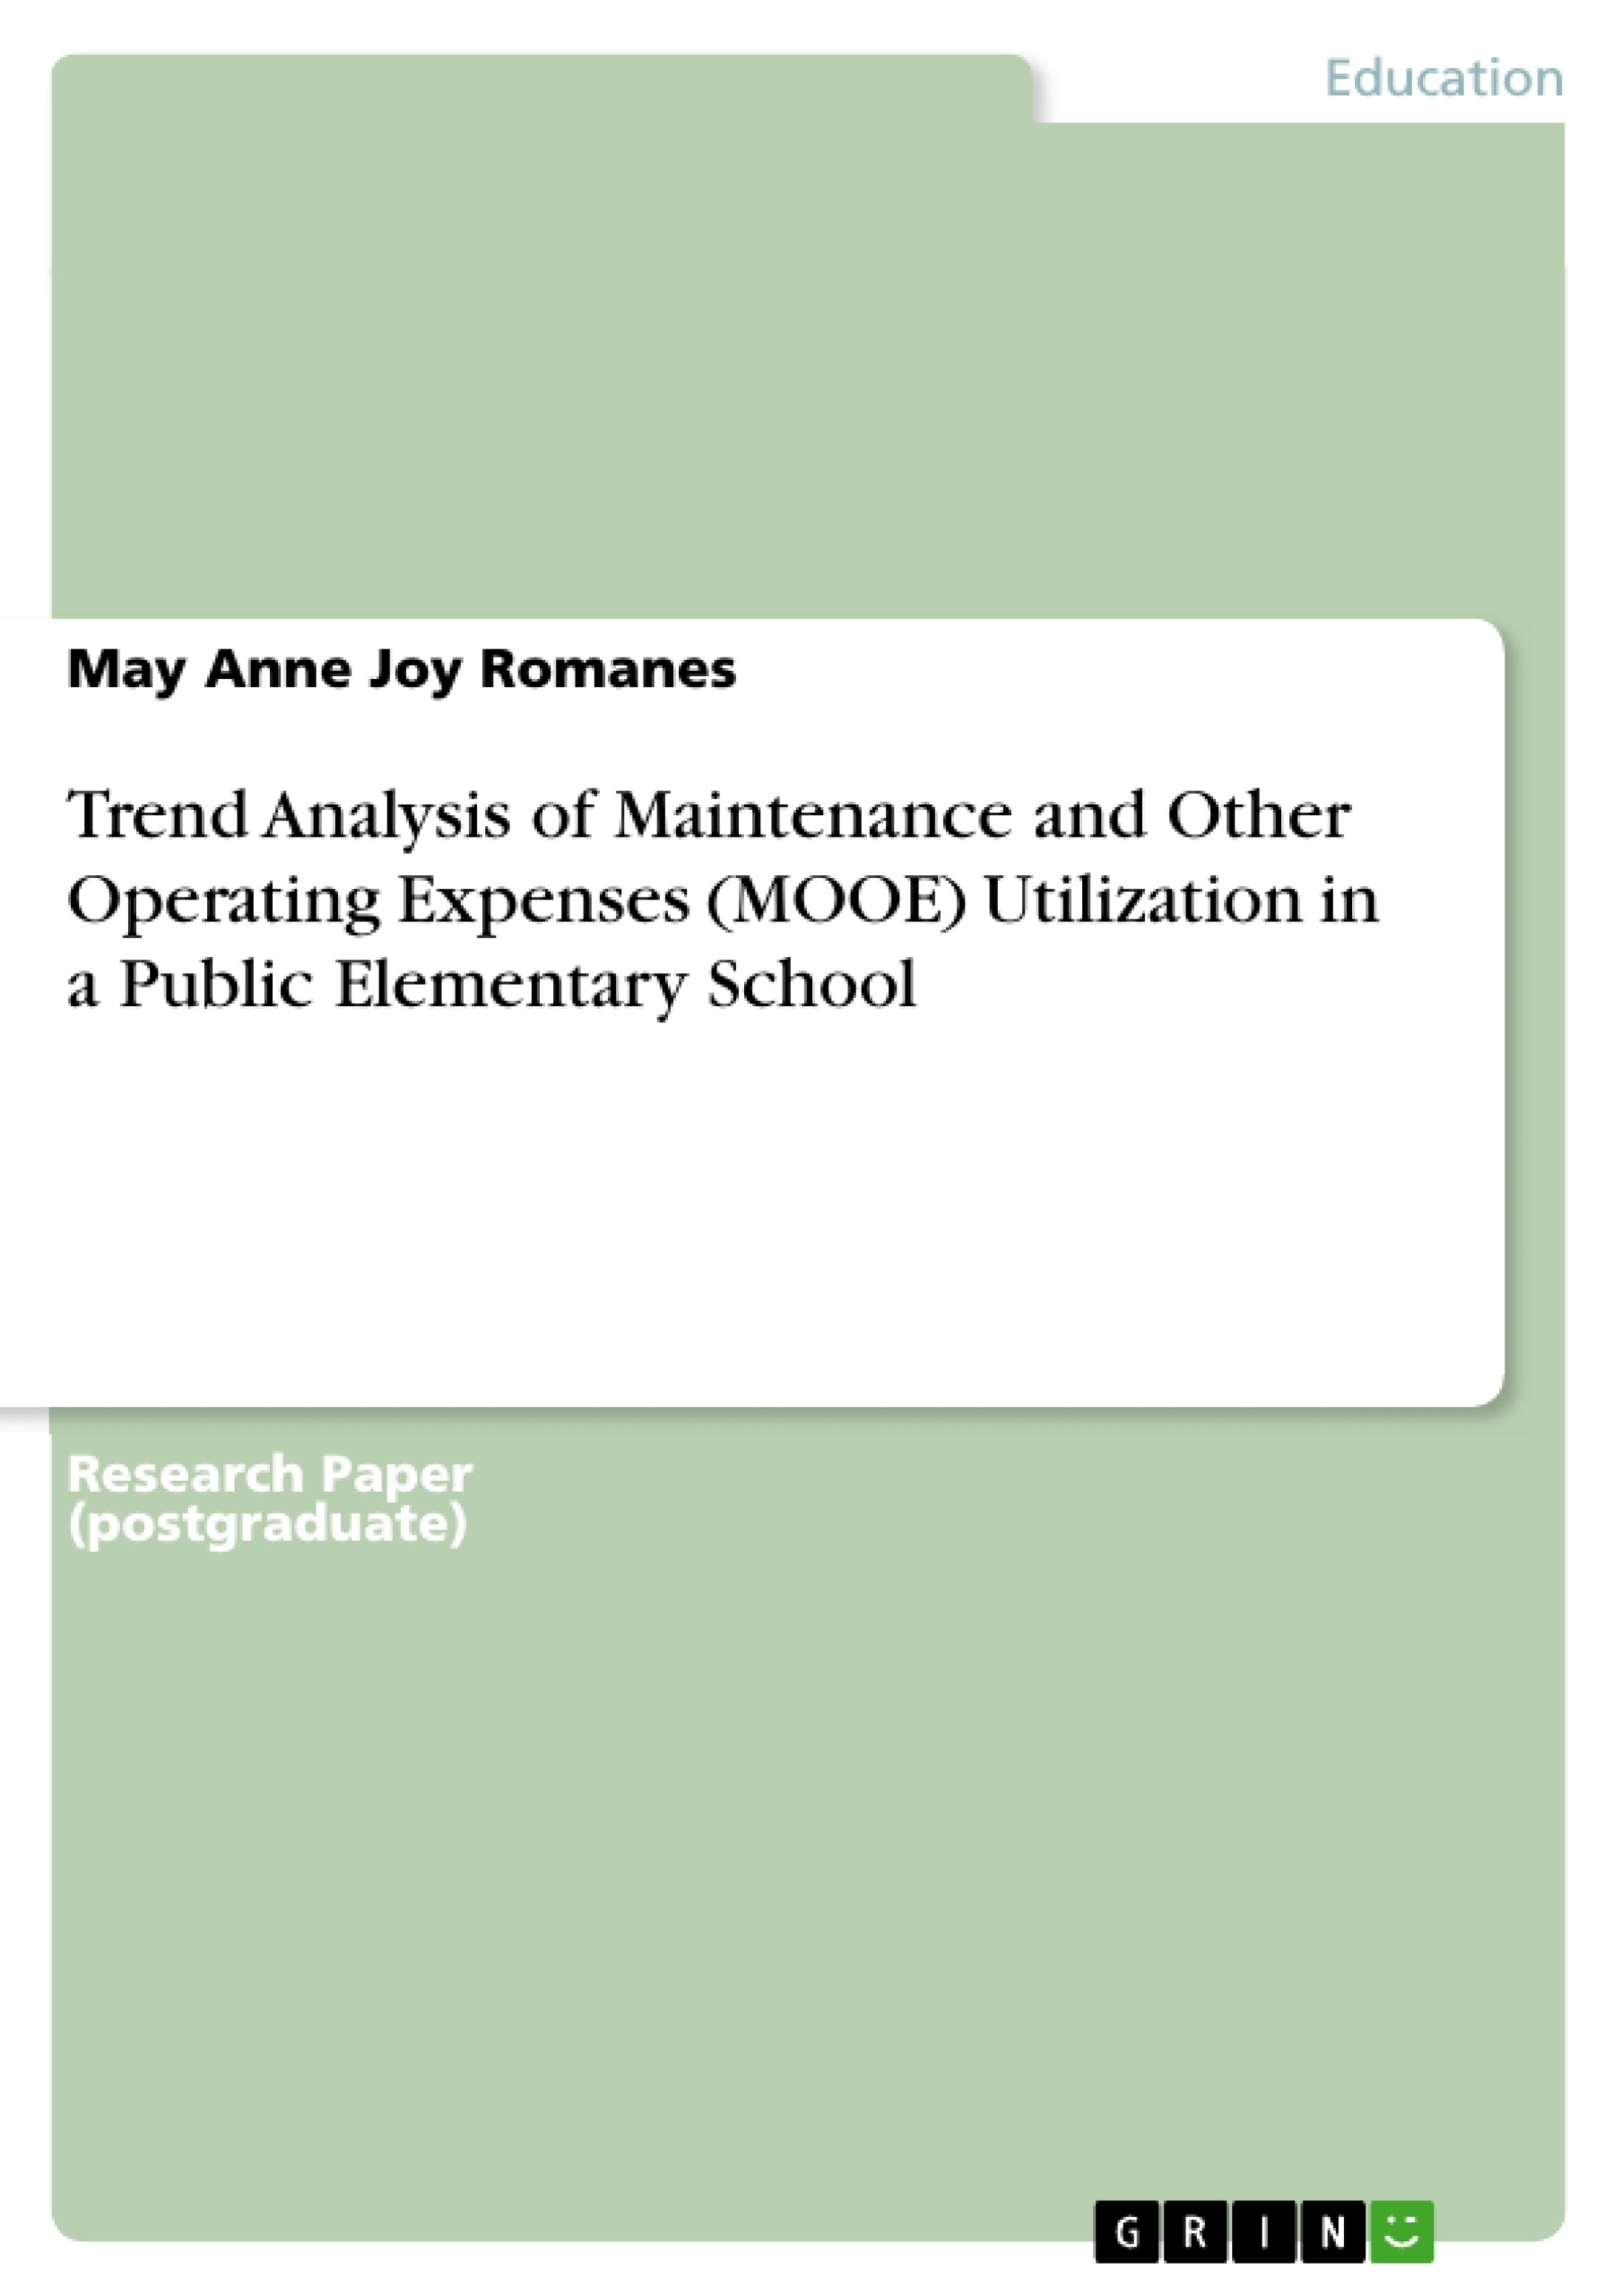 Title: Trend Analysis of Maintenance and Other Operating Expenses (MOOE) Utilization in a Public Elementary School